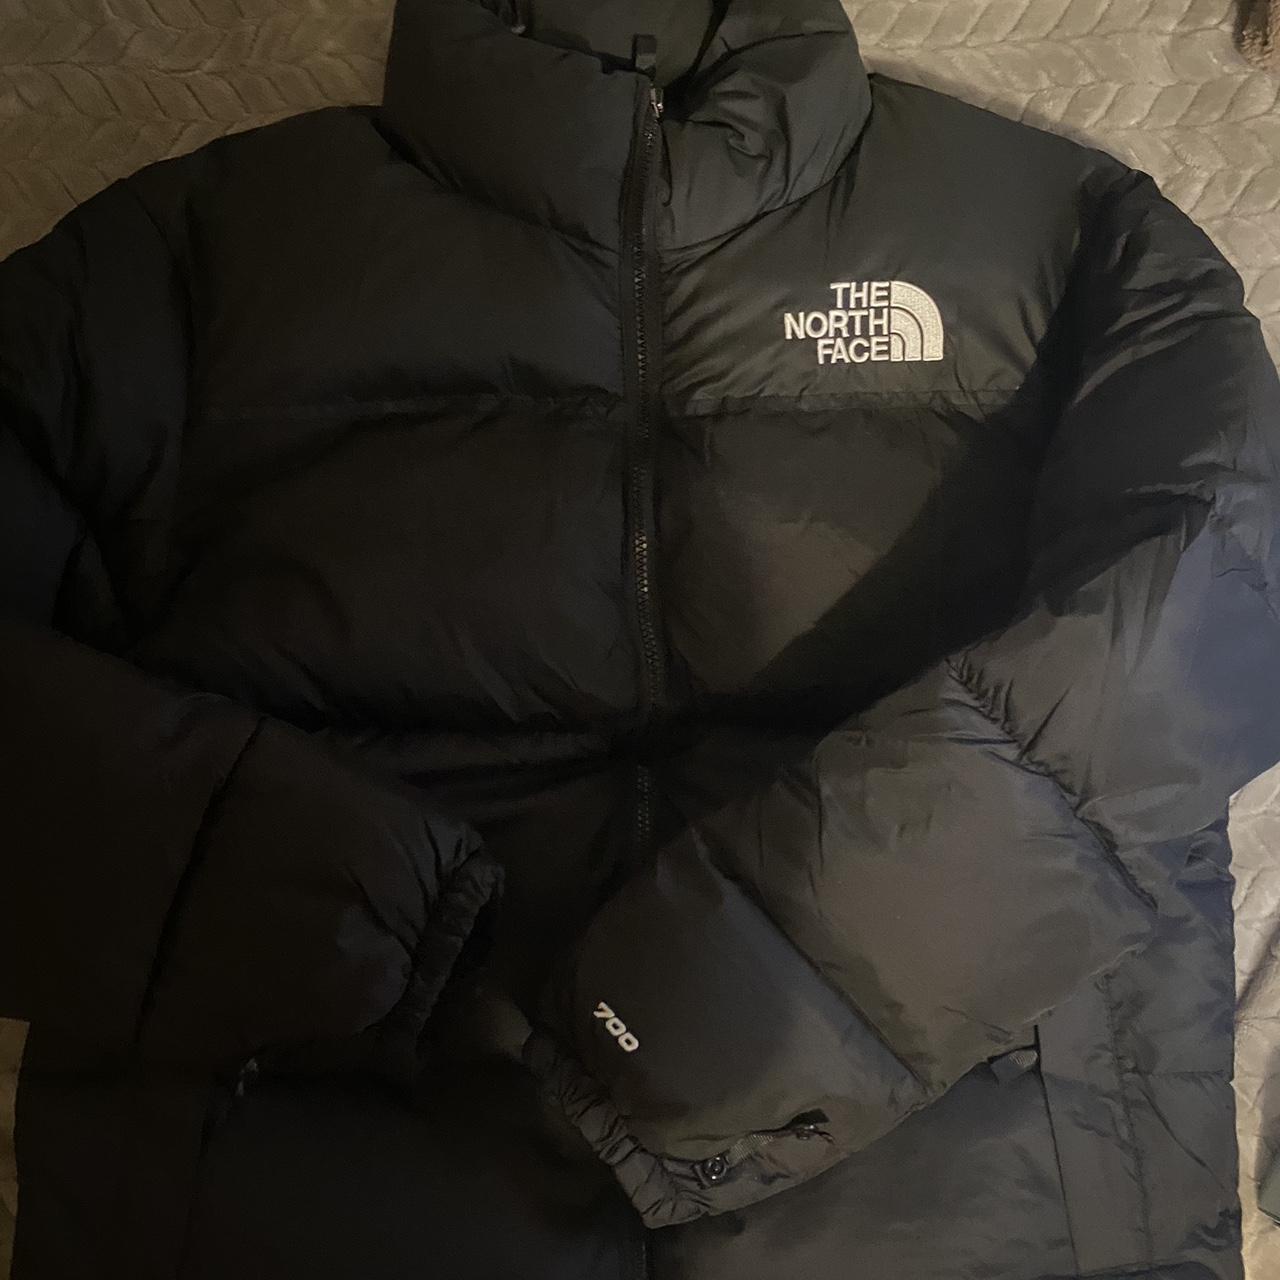 The North Face Coat Never worn brand new - Depop